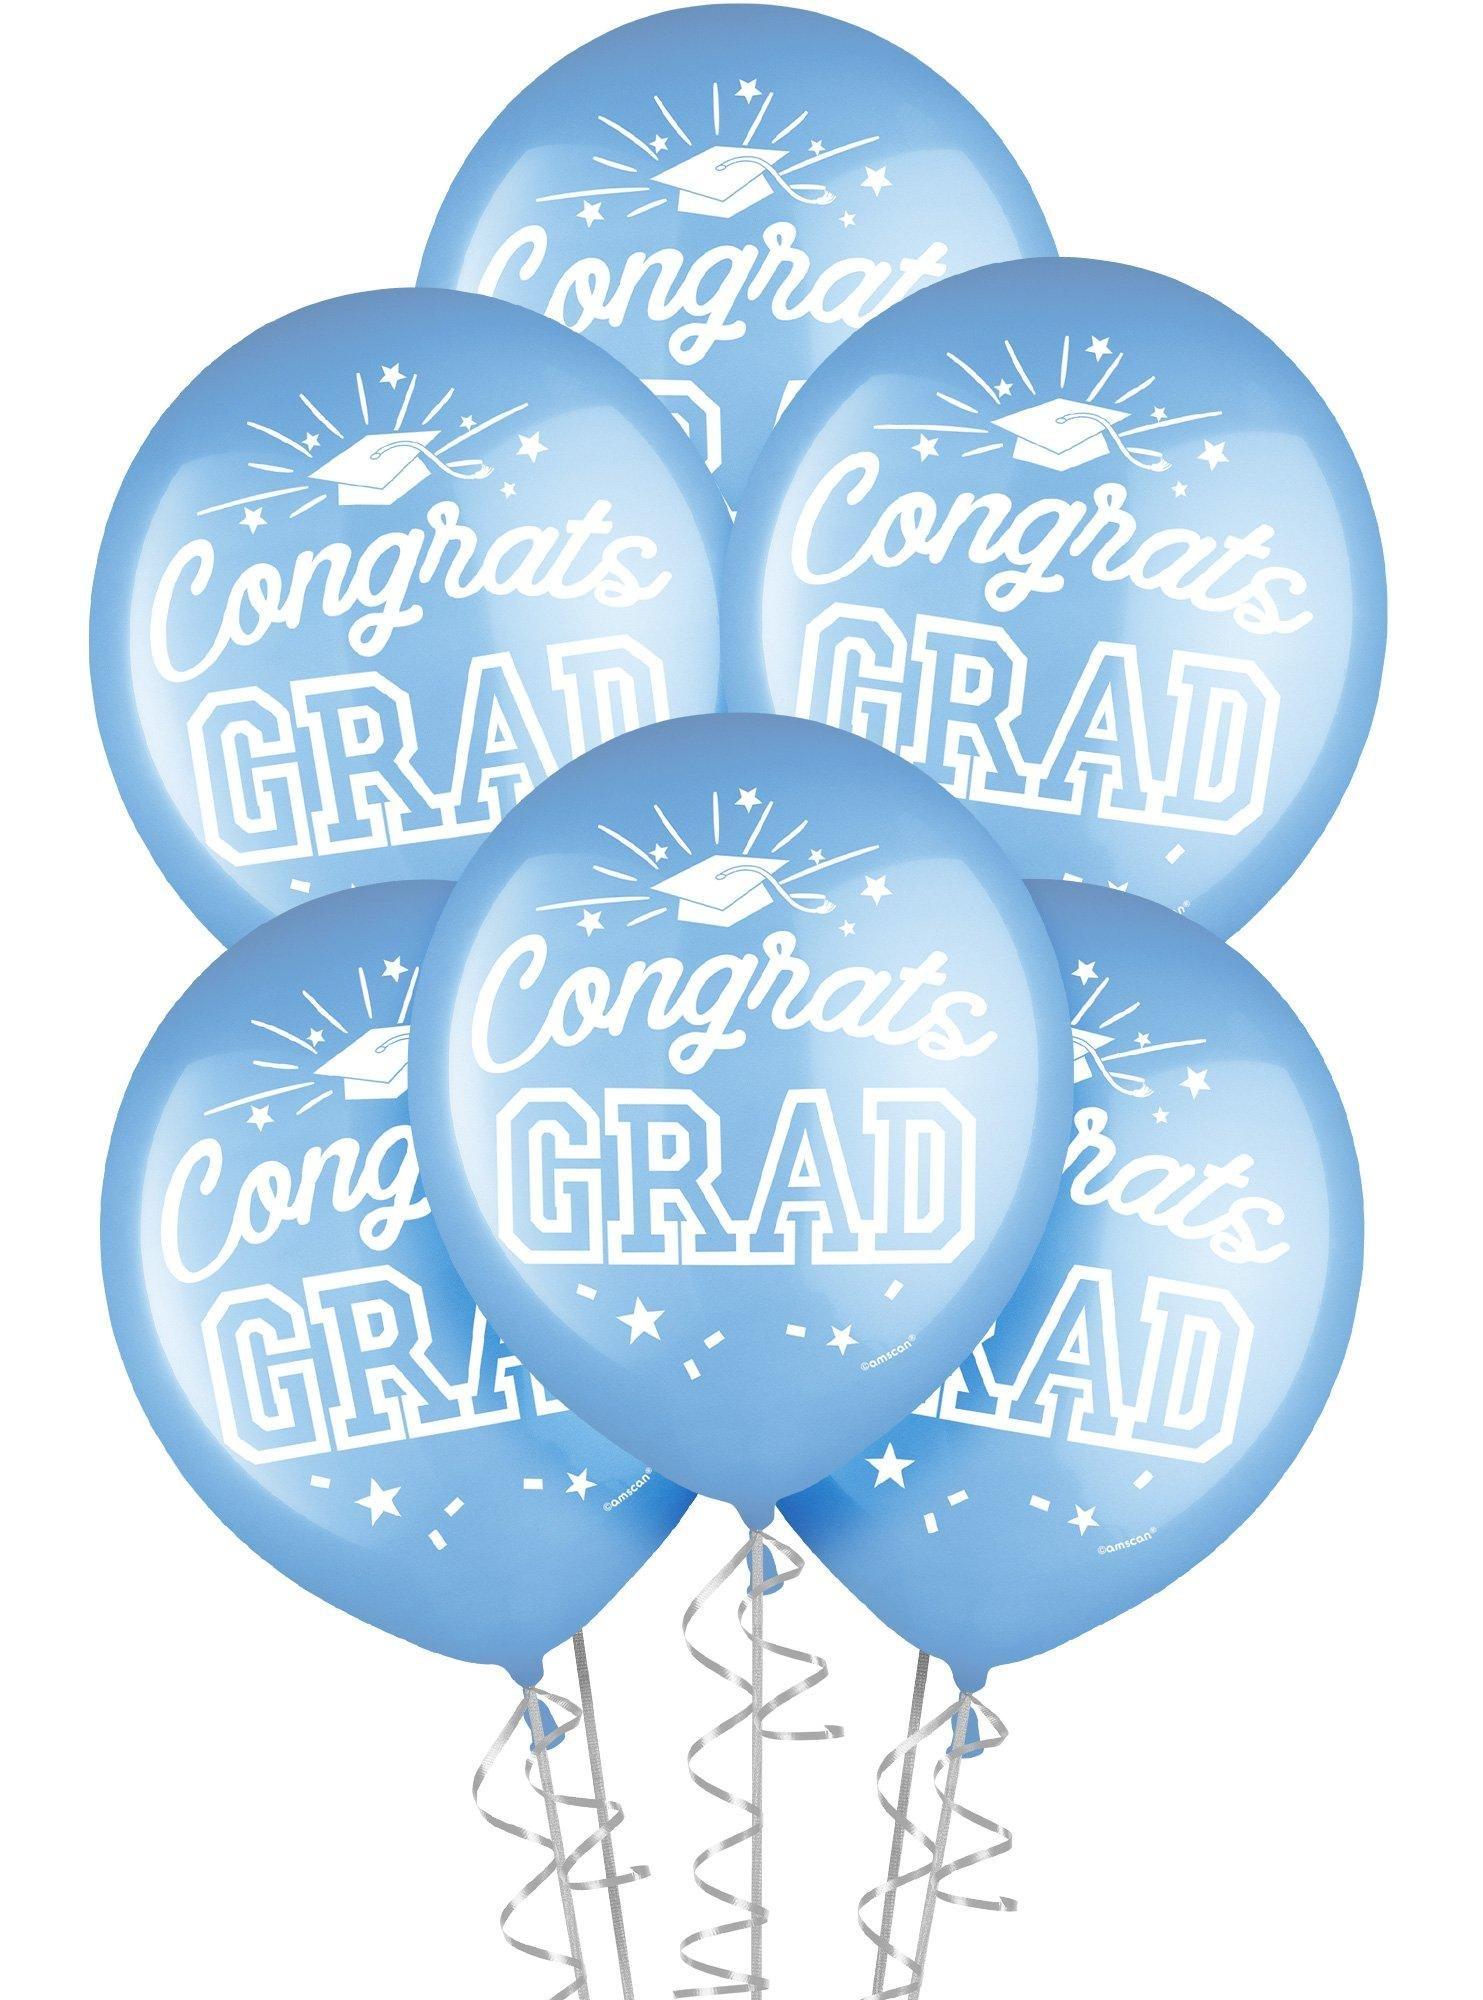 Graduation Party Outdoor Decorations Kit with Banners, Balloons, Yard Signs - Light Blue 2024 Congrats Grad